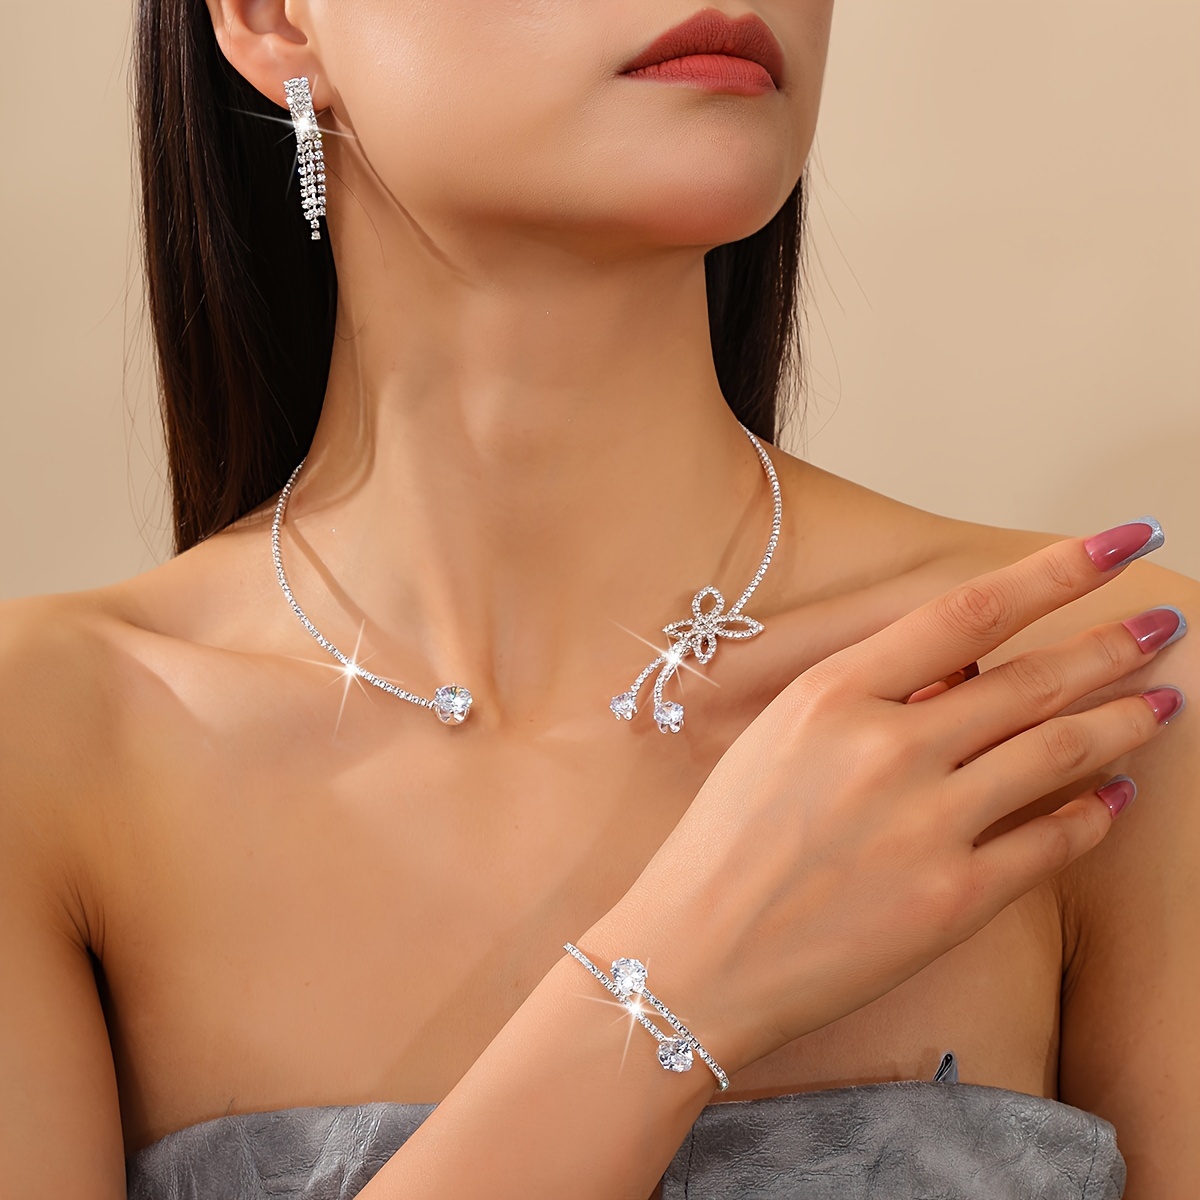 

Elegant Bridal Rhinestone Butterfly Choker Necklace, Bracelet, And Earrings Set - Fashionable Minimalist Full Diamond Collarbone Chain Jewelry Set For Women Simple Style Gifts For Eid